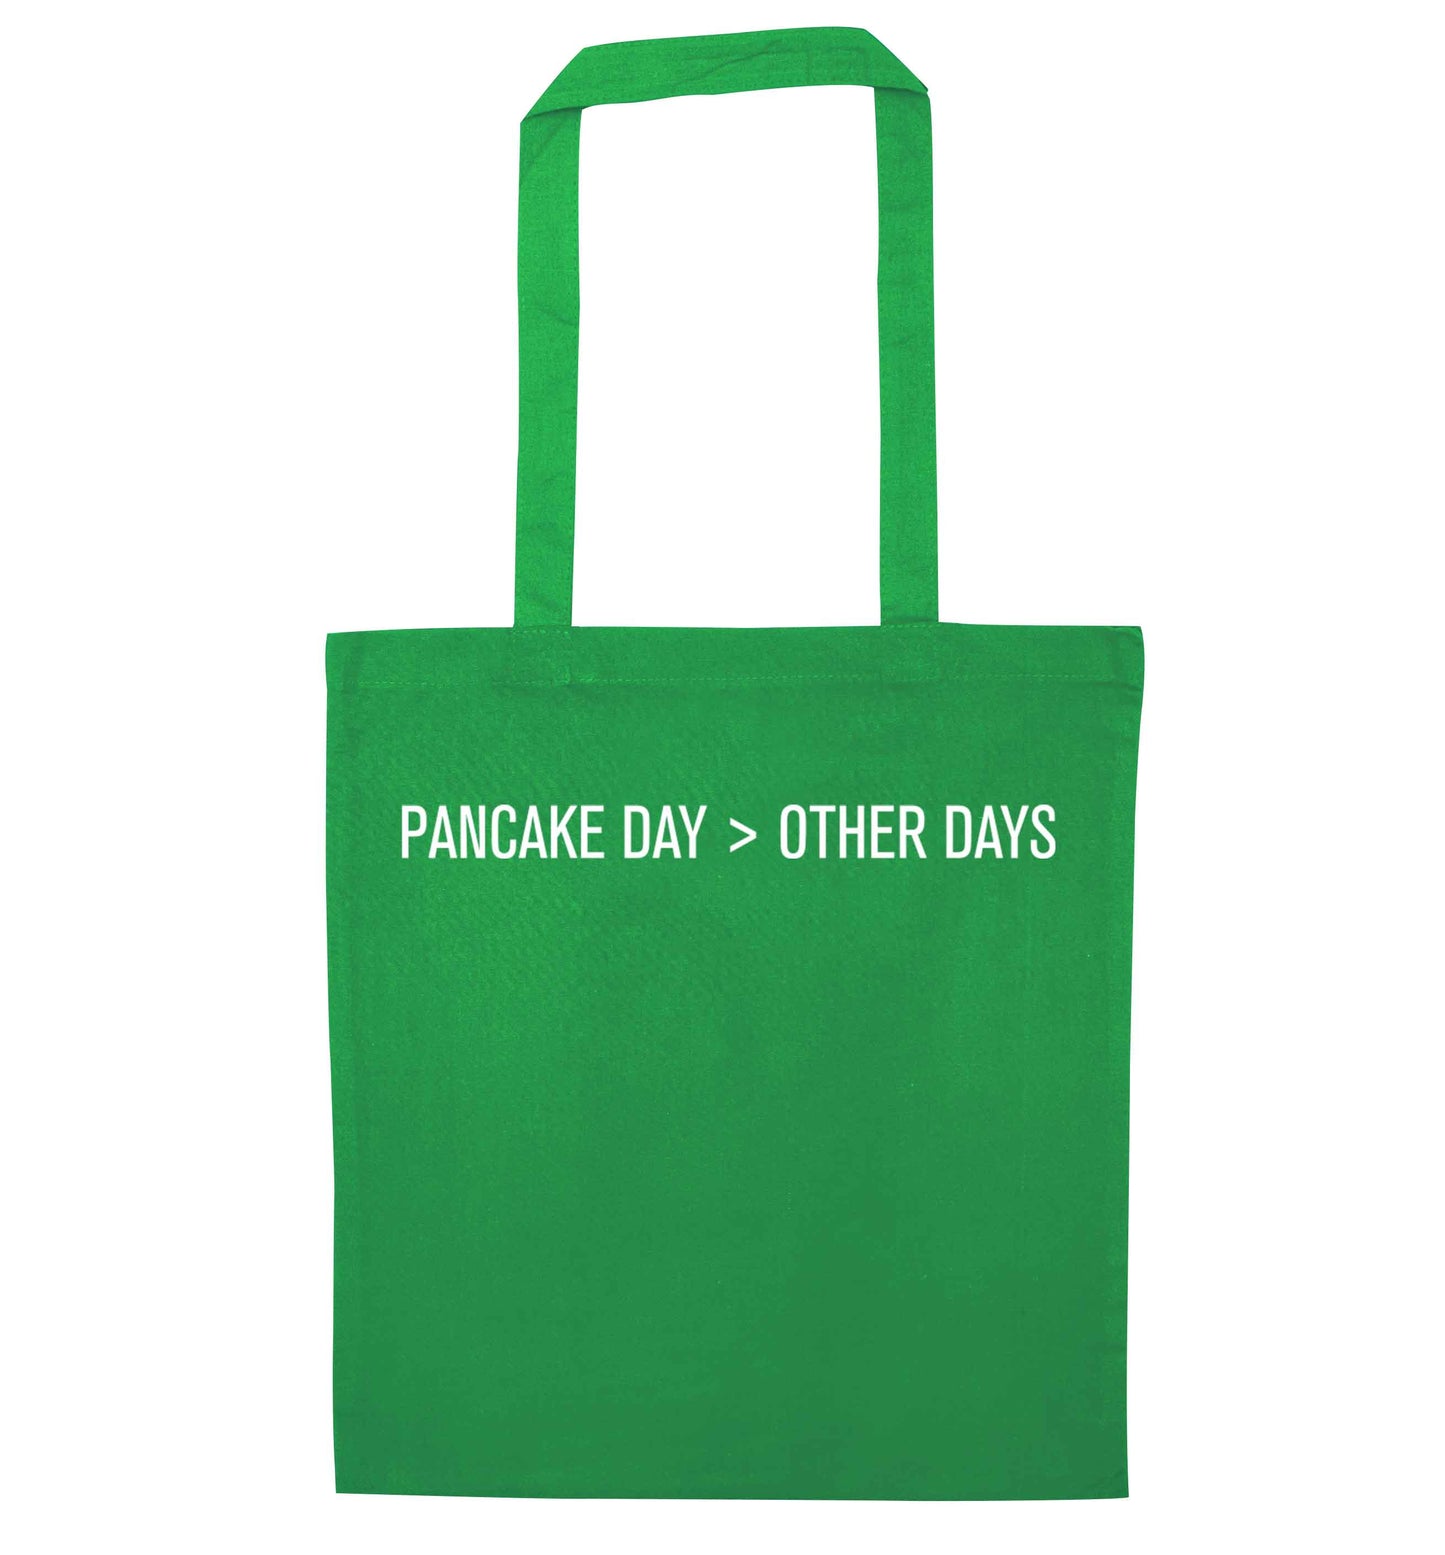 Pancake day > other days green tote bag